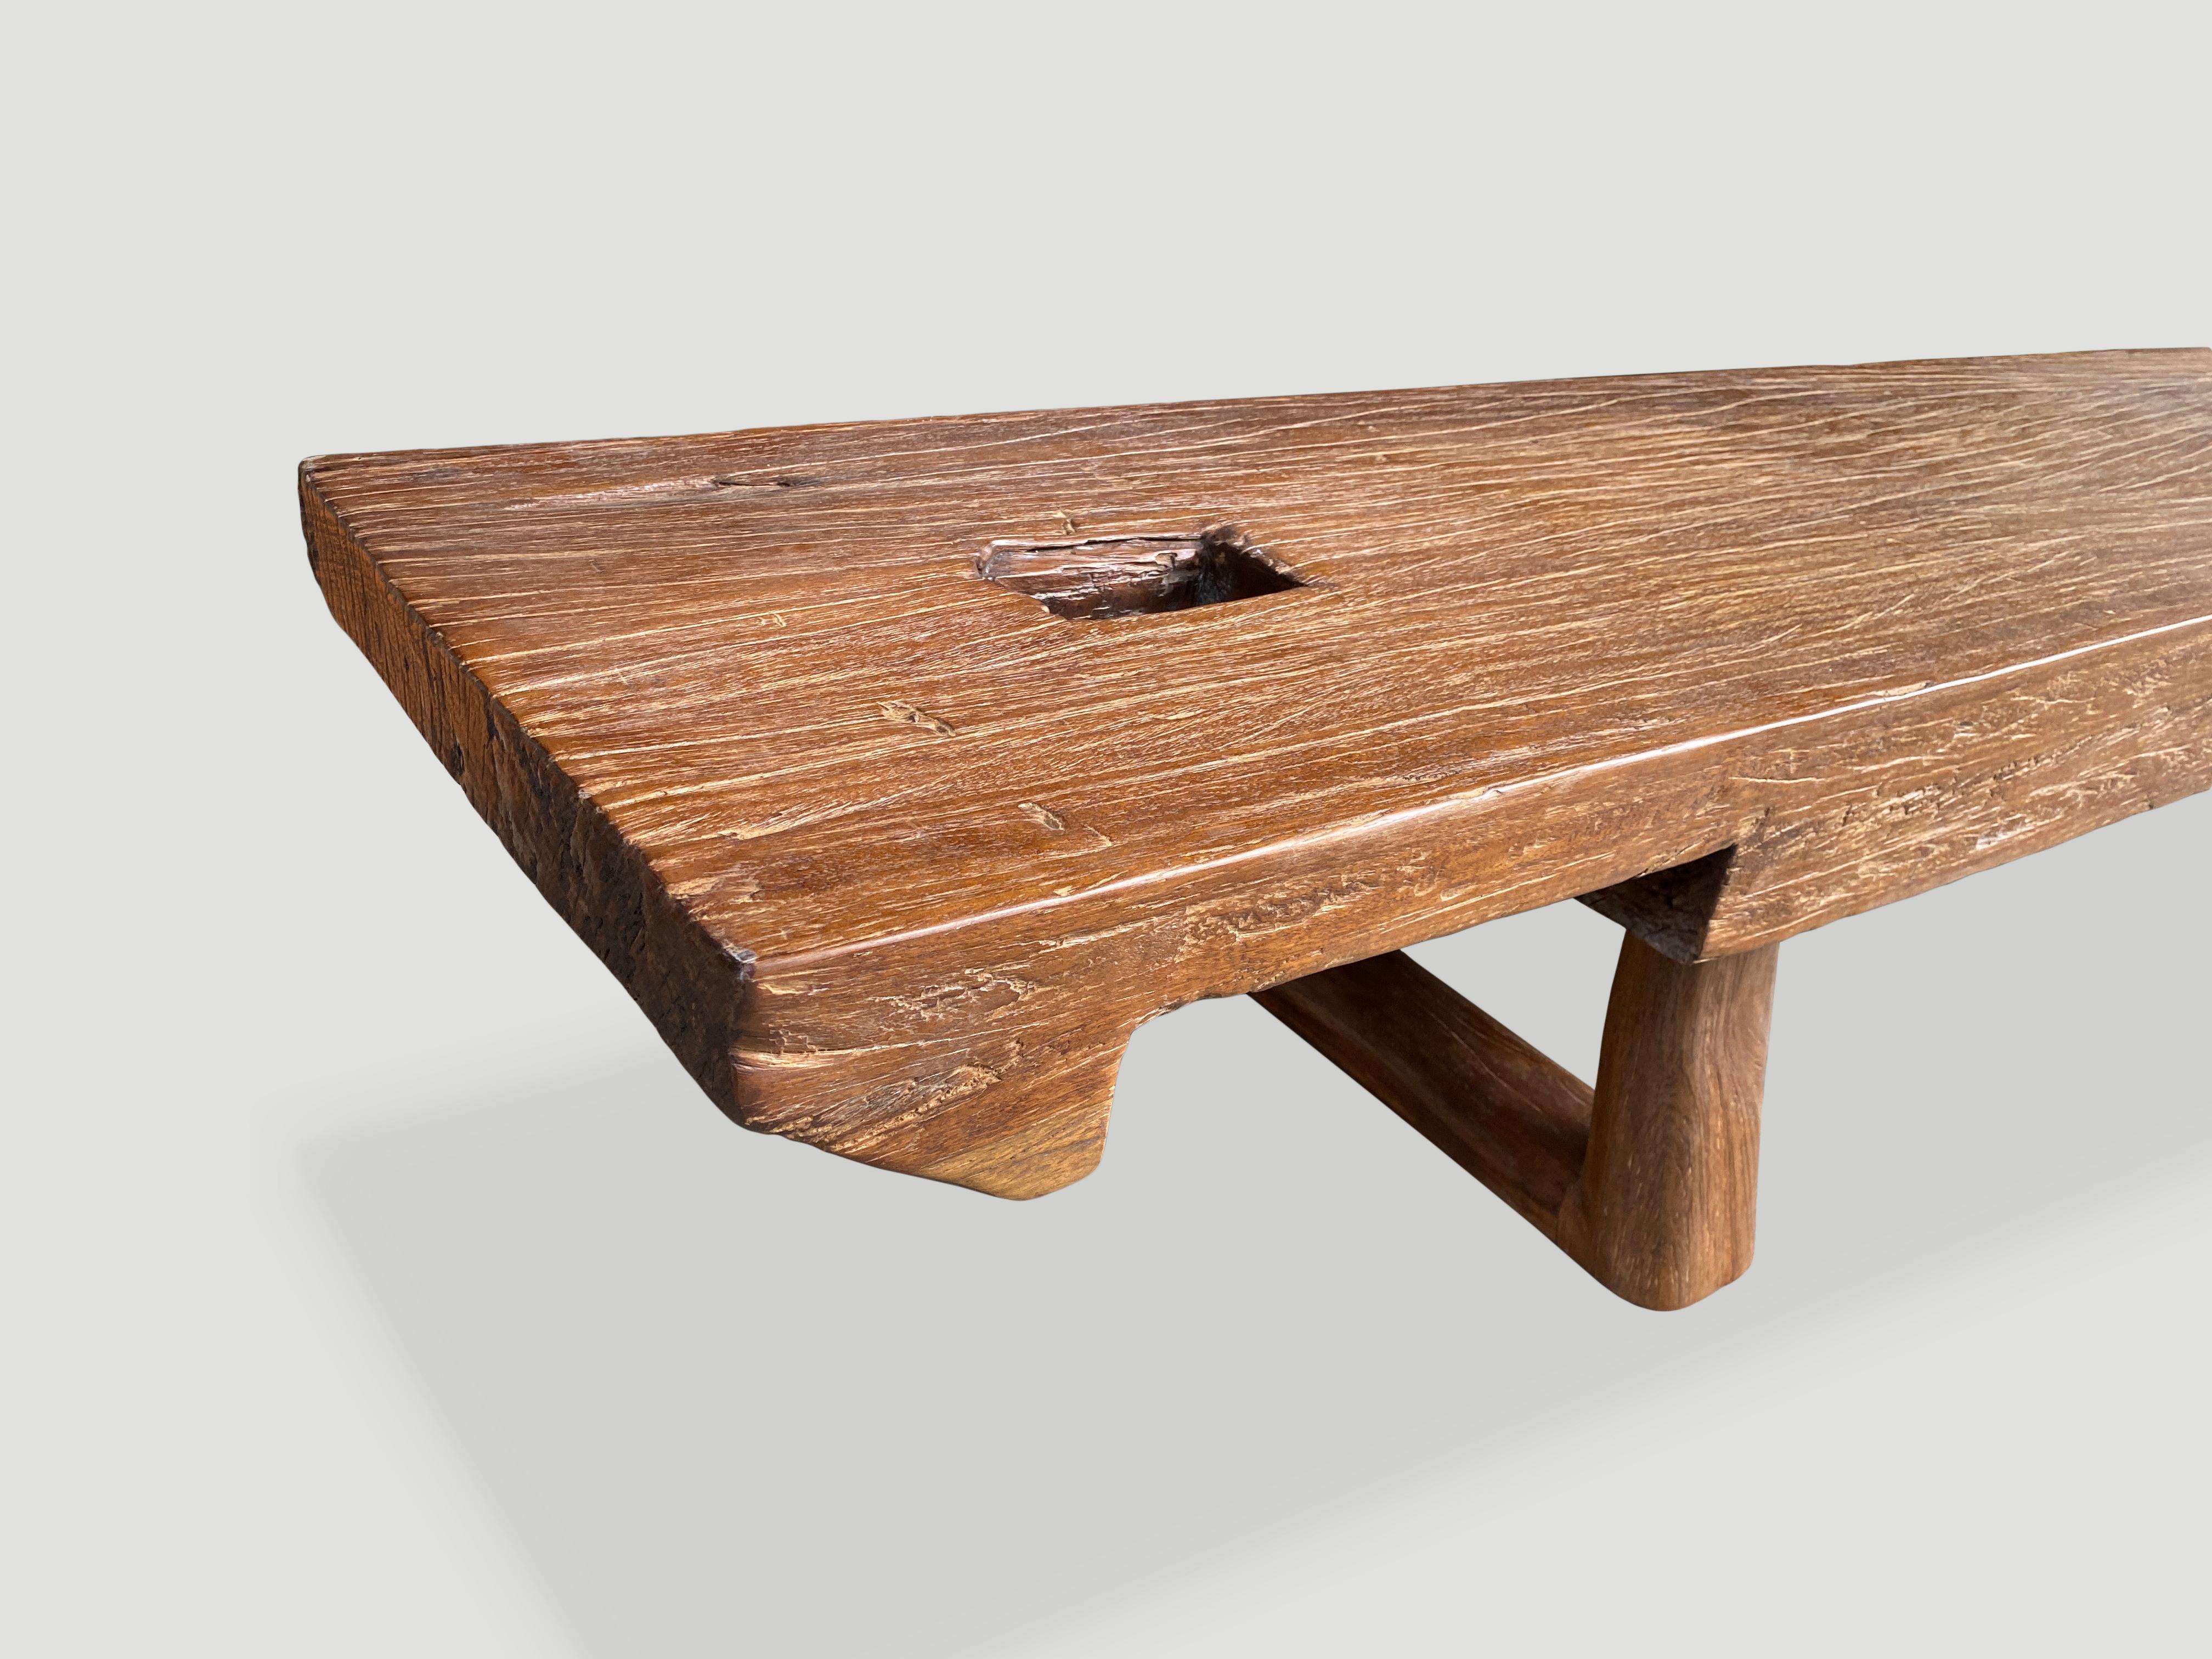 Andrianna Shamaris Brutalist Reclaimed Teak Wood Bench In Excellent Condition For Sale In New York, NY